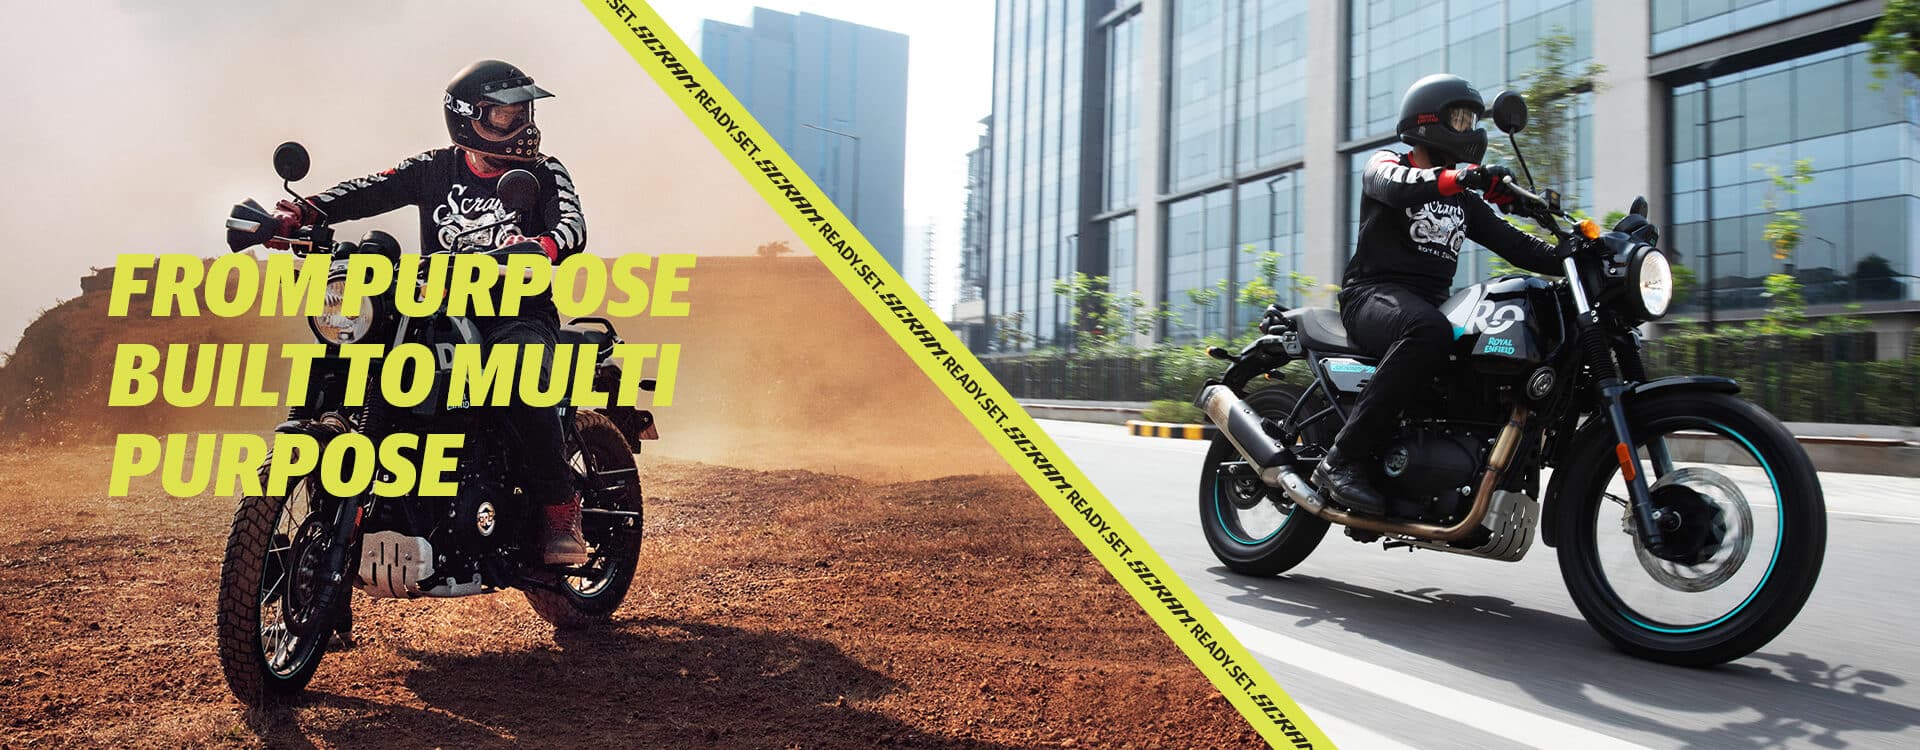 The Royal Enfield Scram is optimised for agility